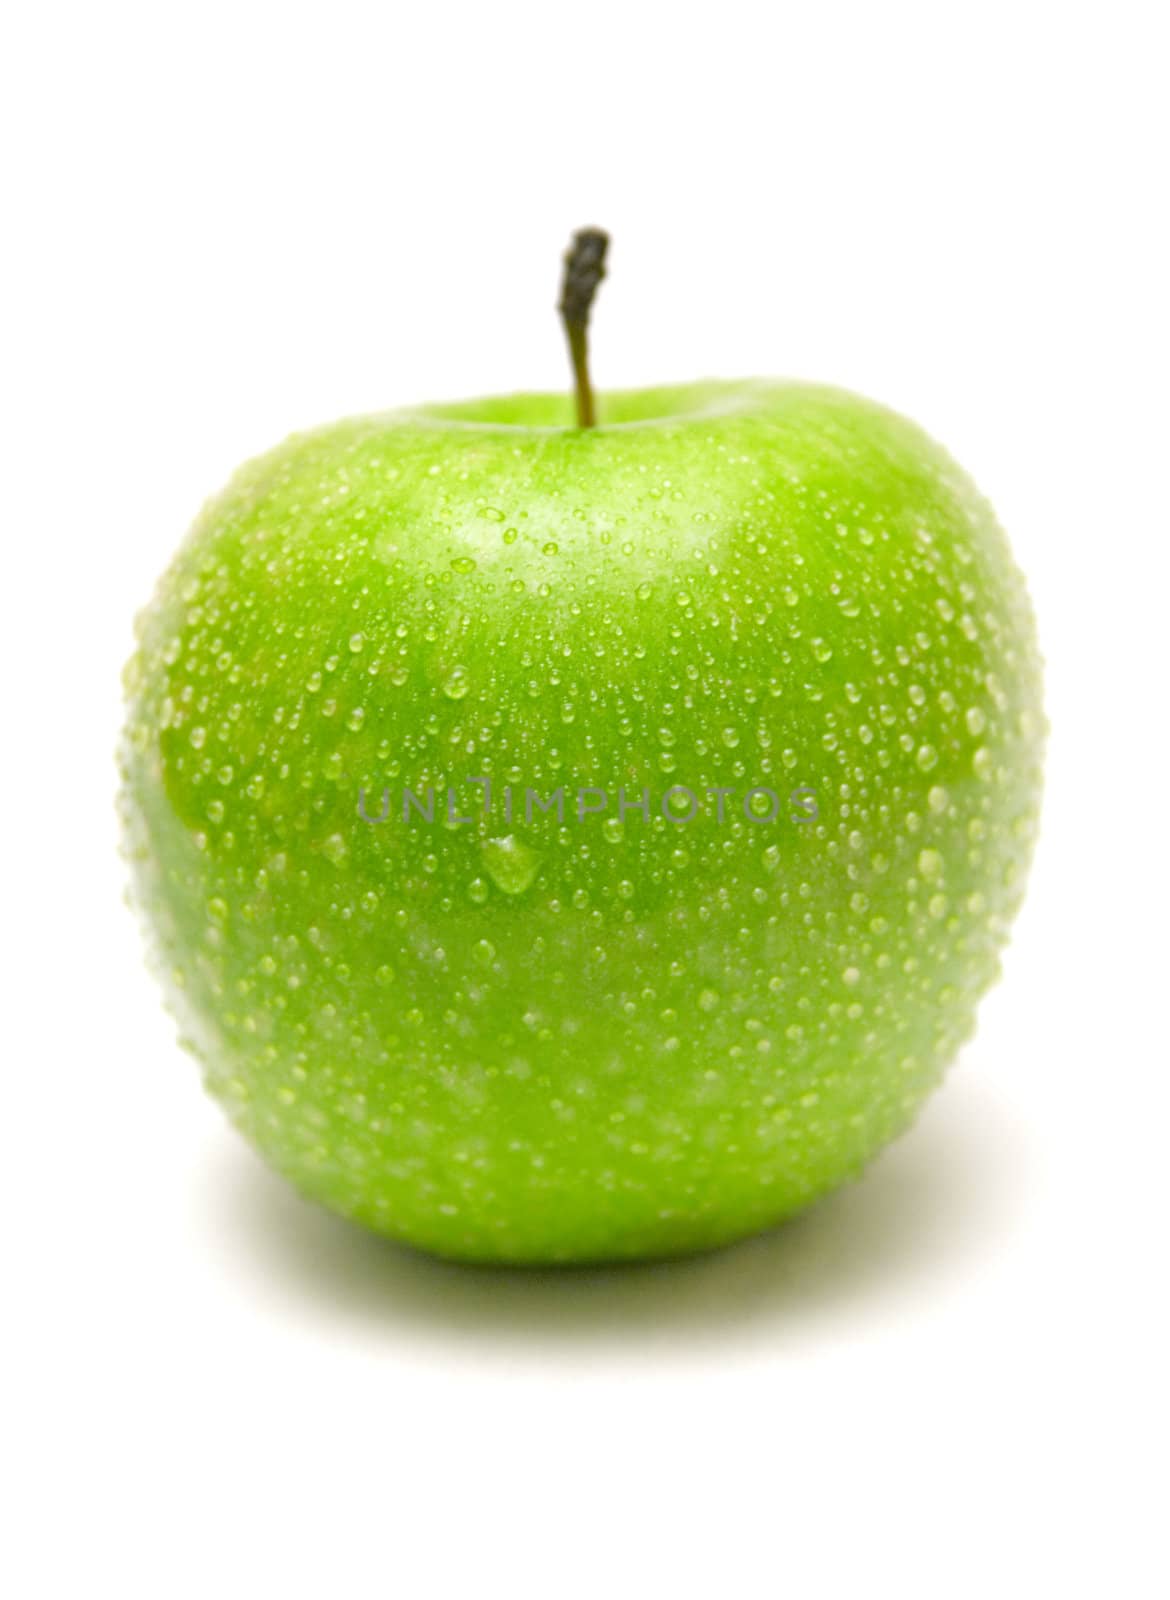 Green Apple with Raindrops by winterling